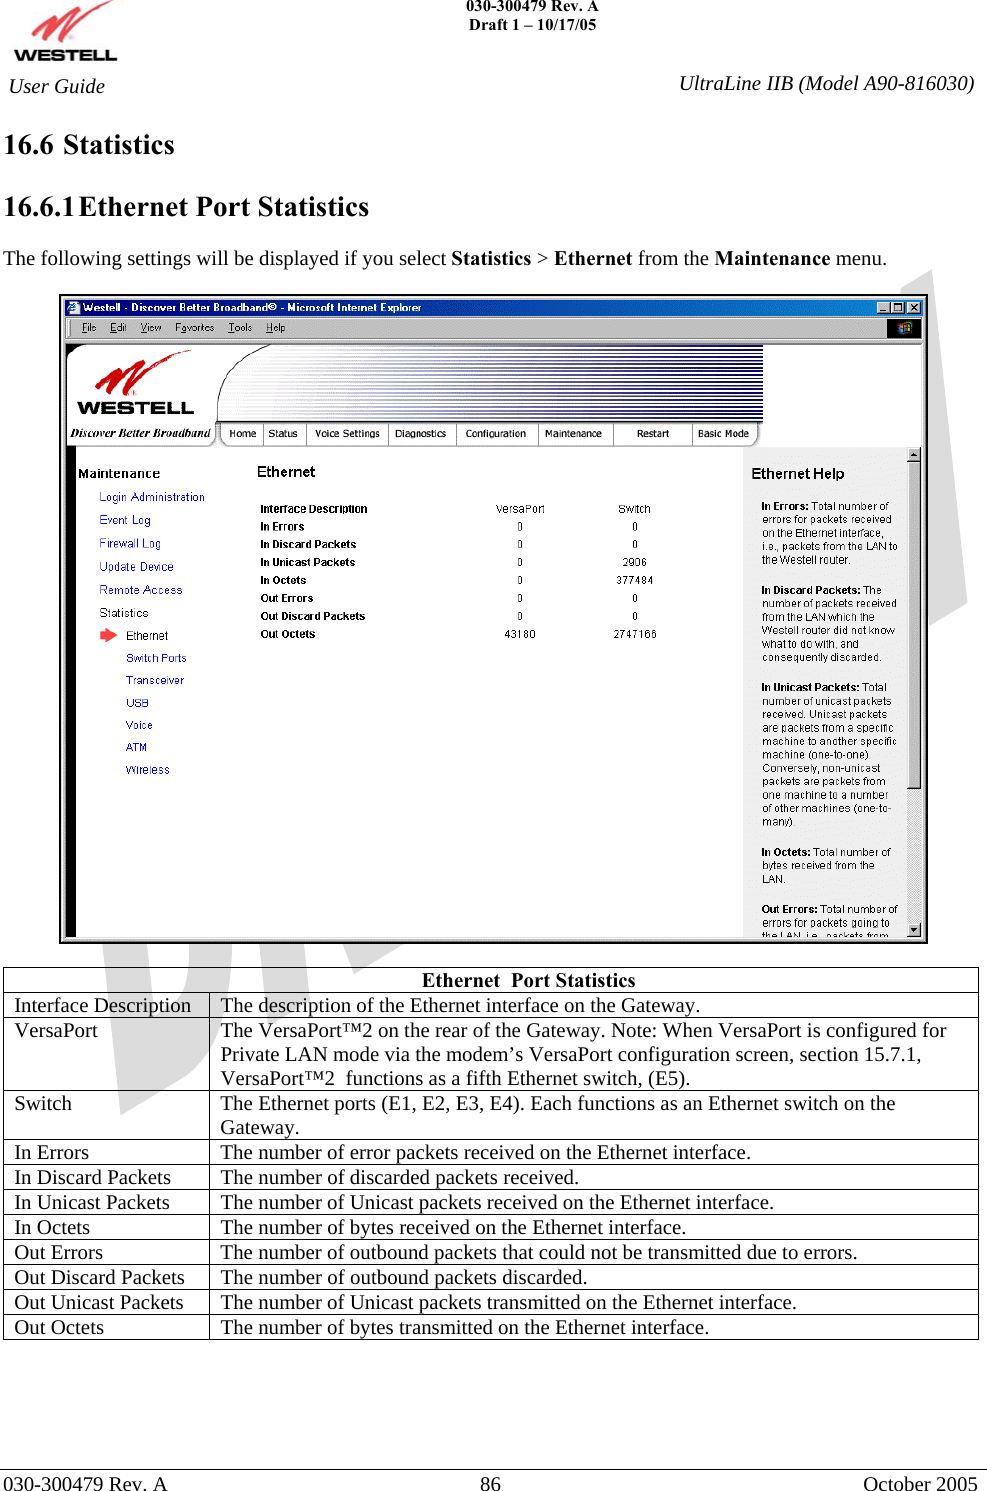    030-300479 Rev. A Draft 1 – 10/17/05   030-300479 Rev. A  86  October 2005  User Guide  UltraLine IIB (Model A90-816030)16.6 Statistics  16.6.1 Ethernet Port Statistics  The following settings will be displayed if you select Statistics &gt; Ethernet from the Maintenance menu.     Ethernet  Port Statistics Interface Description  The description of the Ethernet interface on the Gateway. VersaPort  The VersaPort™2 on the rear of the Gateway. Note: When VersaPort is configured for Private LAN mode via the modem’s VersaPort configuration screen, section 15.7.1, VersaPort™2  functions as a fifth Ethernet switch, (E5). Switch  The Ethernet ports (E1, E2, E3, E4). Each functions as an Ethernet switch on the Gateway. In Errors  The number of error packets received on the Ethernet interface. In Discard Packets  The number of discarded packets received. In Unicast Packets  The number of Unicast packets received on the Ethernet interface. In Octets  The number of bytes received on the Ethernet interface. Out Errors  The number of outbound packets that could not be transmitted due to errors. Out Discard Packets  The number of outbound packets discarded. Out Unicast Packets  The number of Unicast packets transmitted on the Ethernet interface. Out Octets  The number of bytes transmitted on the Ethernet interface.      